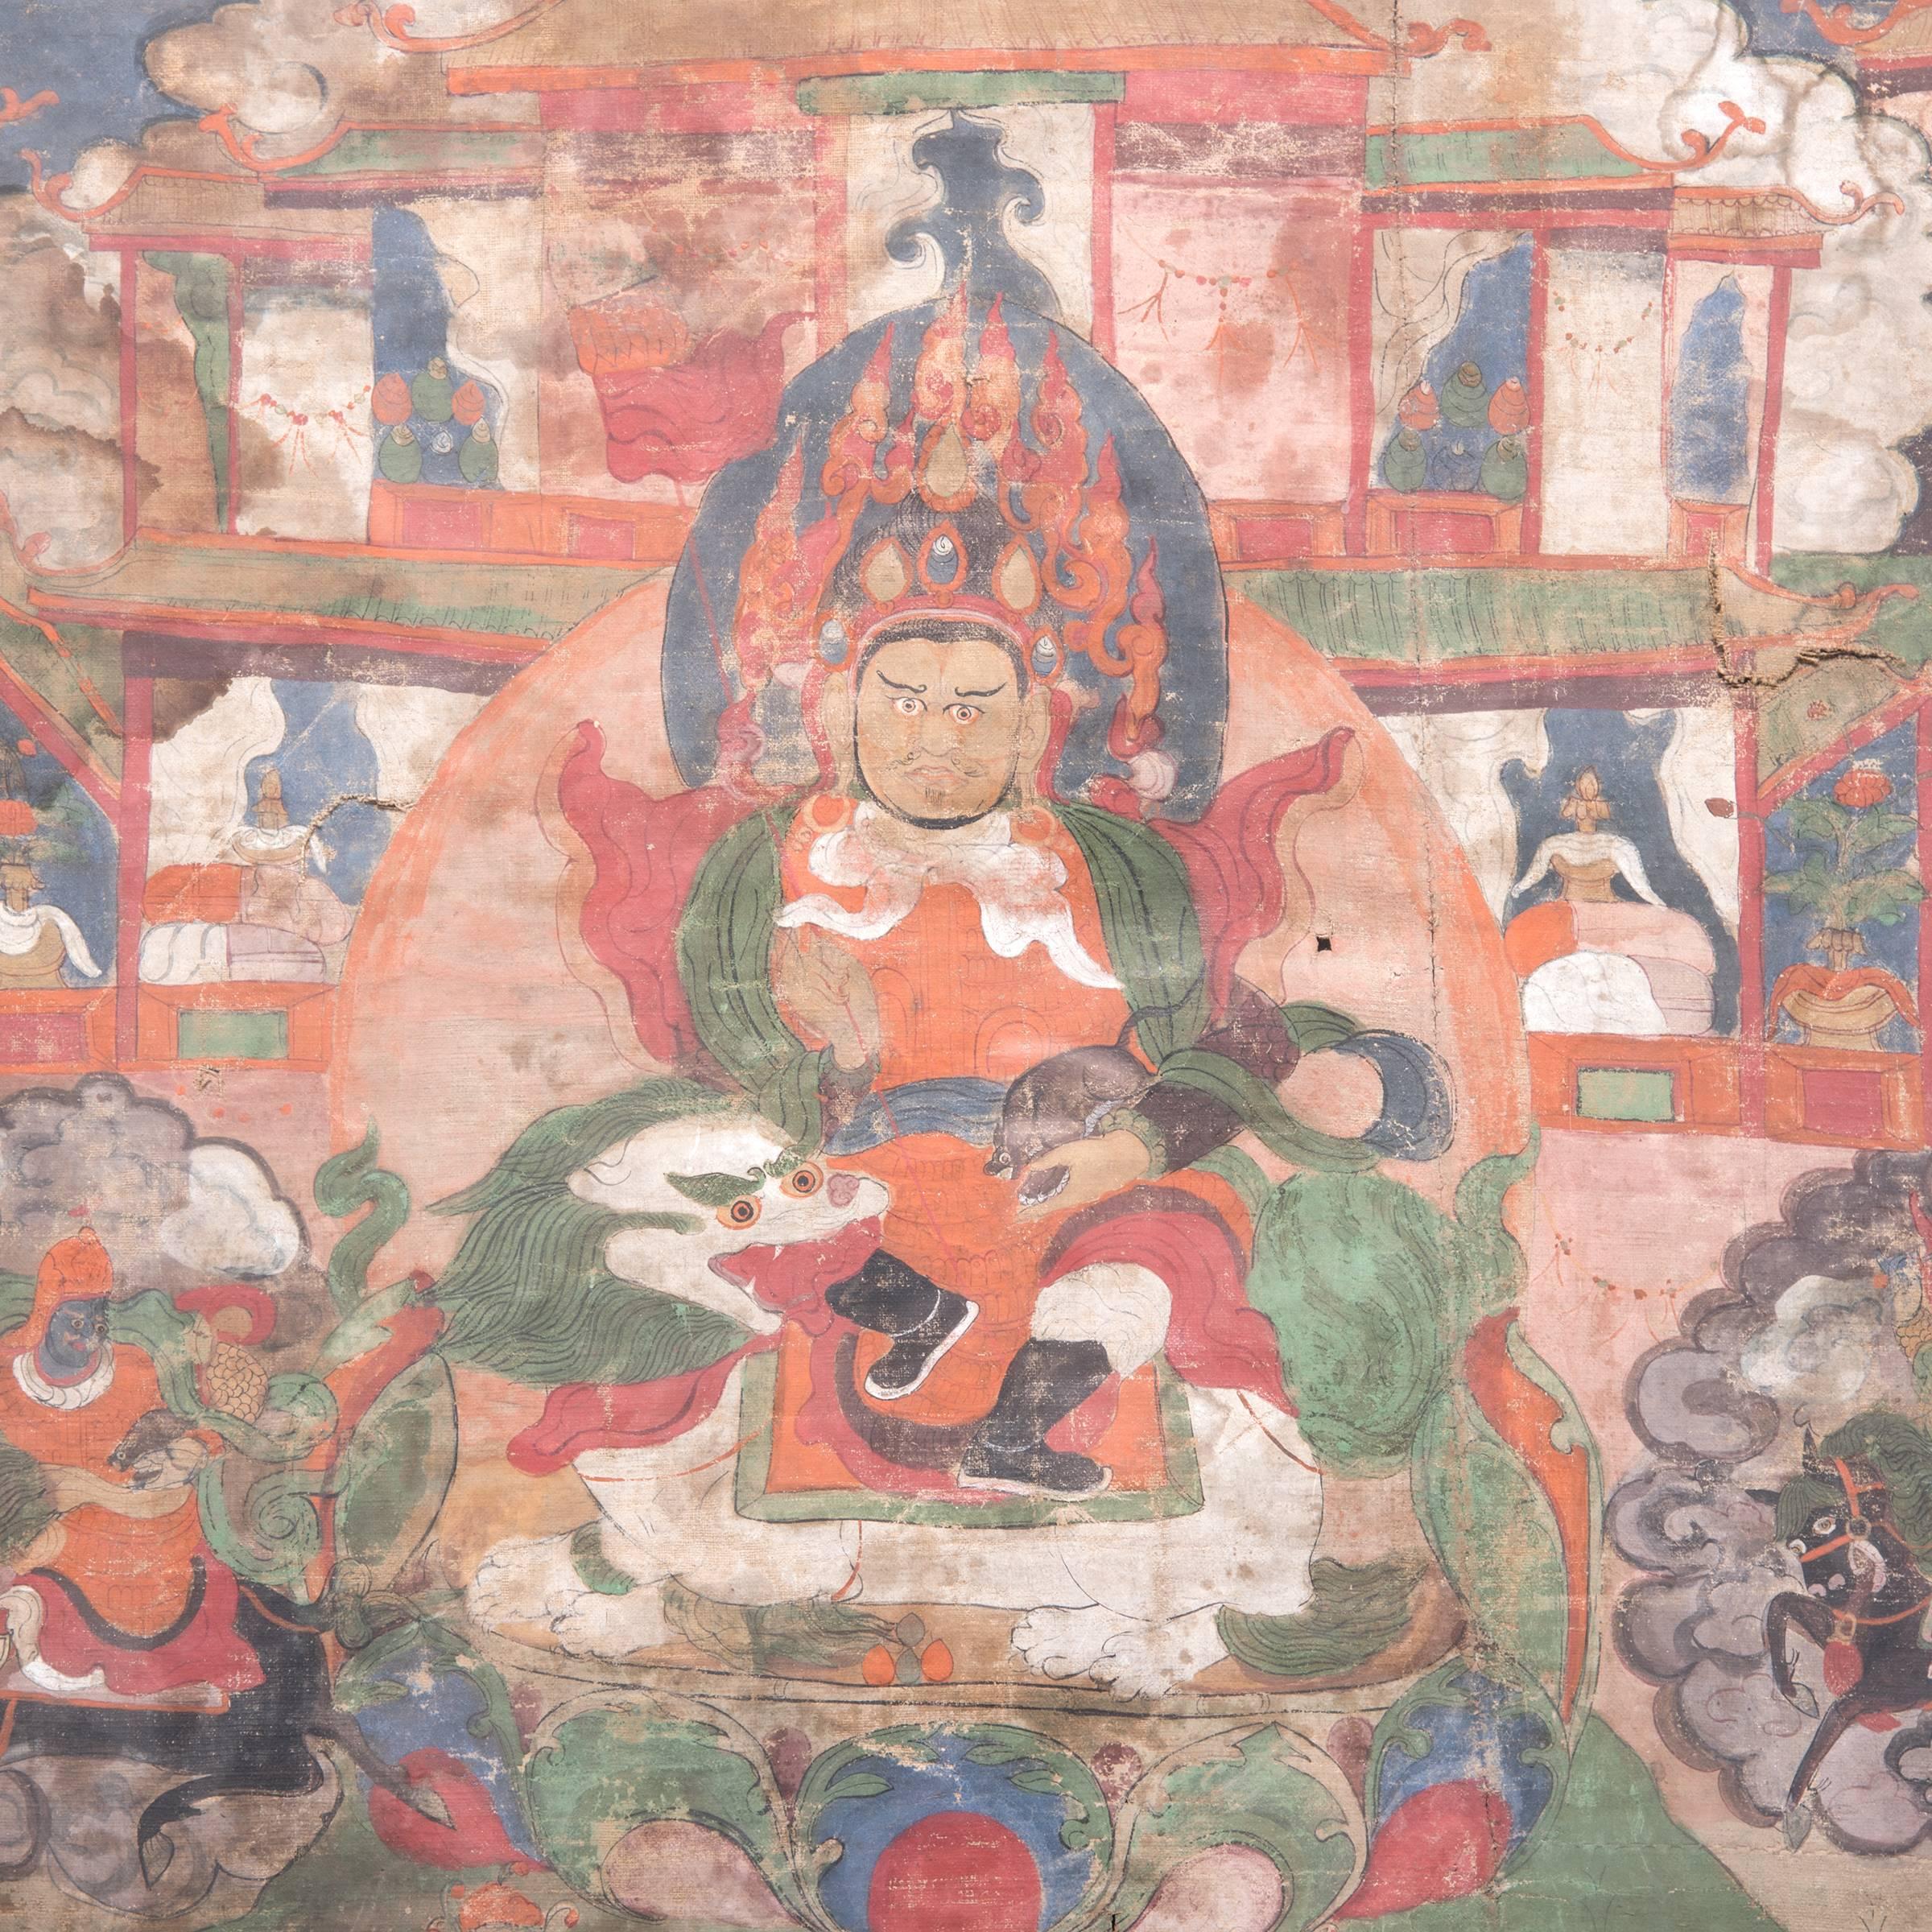 Thangkas are devotional paintings displayed by Buddhists in monasteries, temples, and even their homes. This 19th-century Tibetan Thangka is rich with historical figures and symbolism arranged around the Viashravana in the painting's center. This